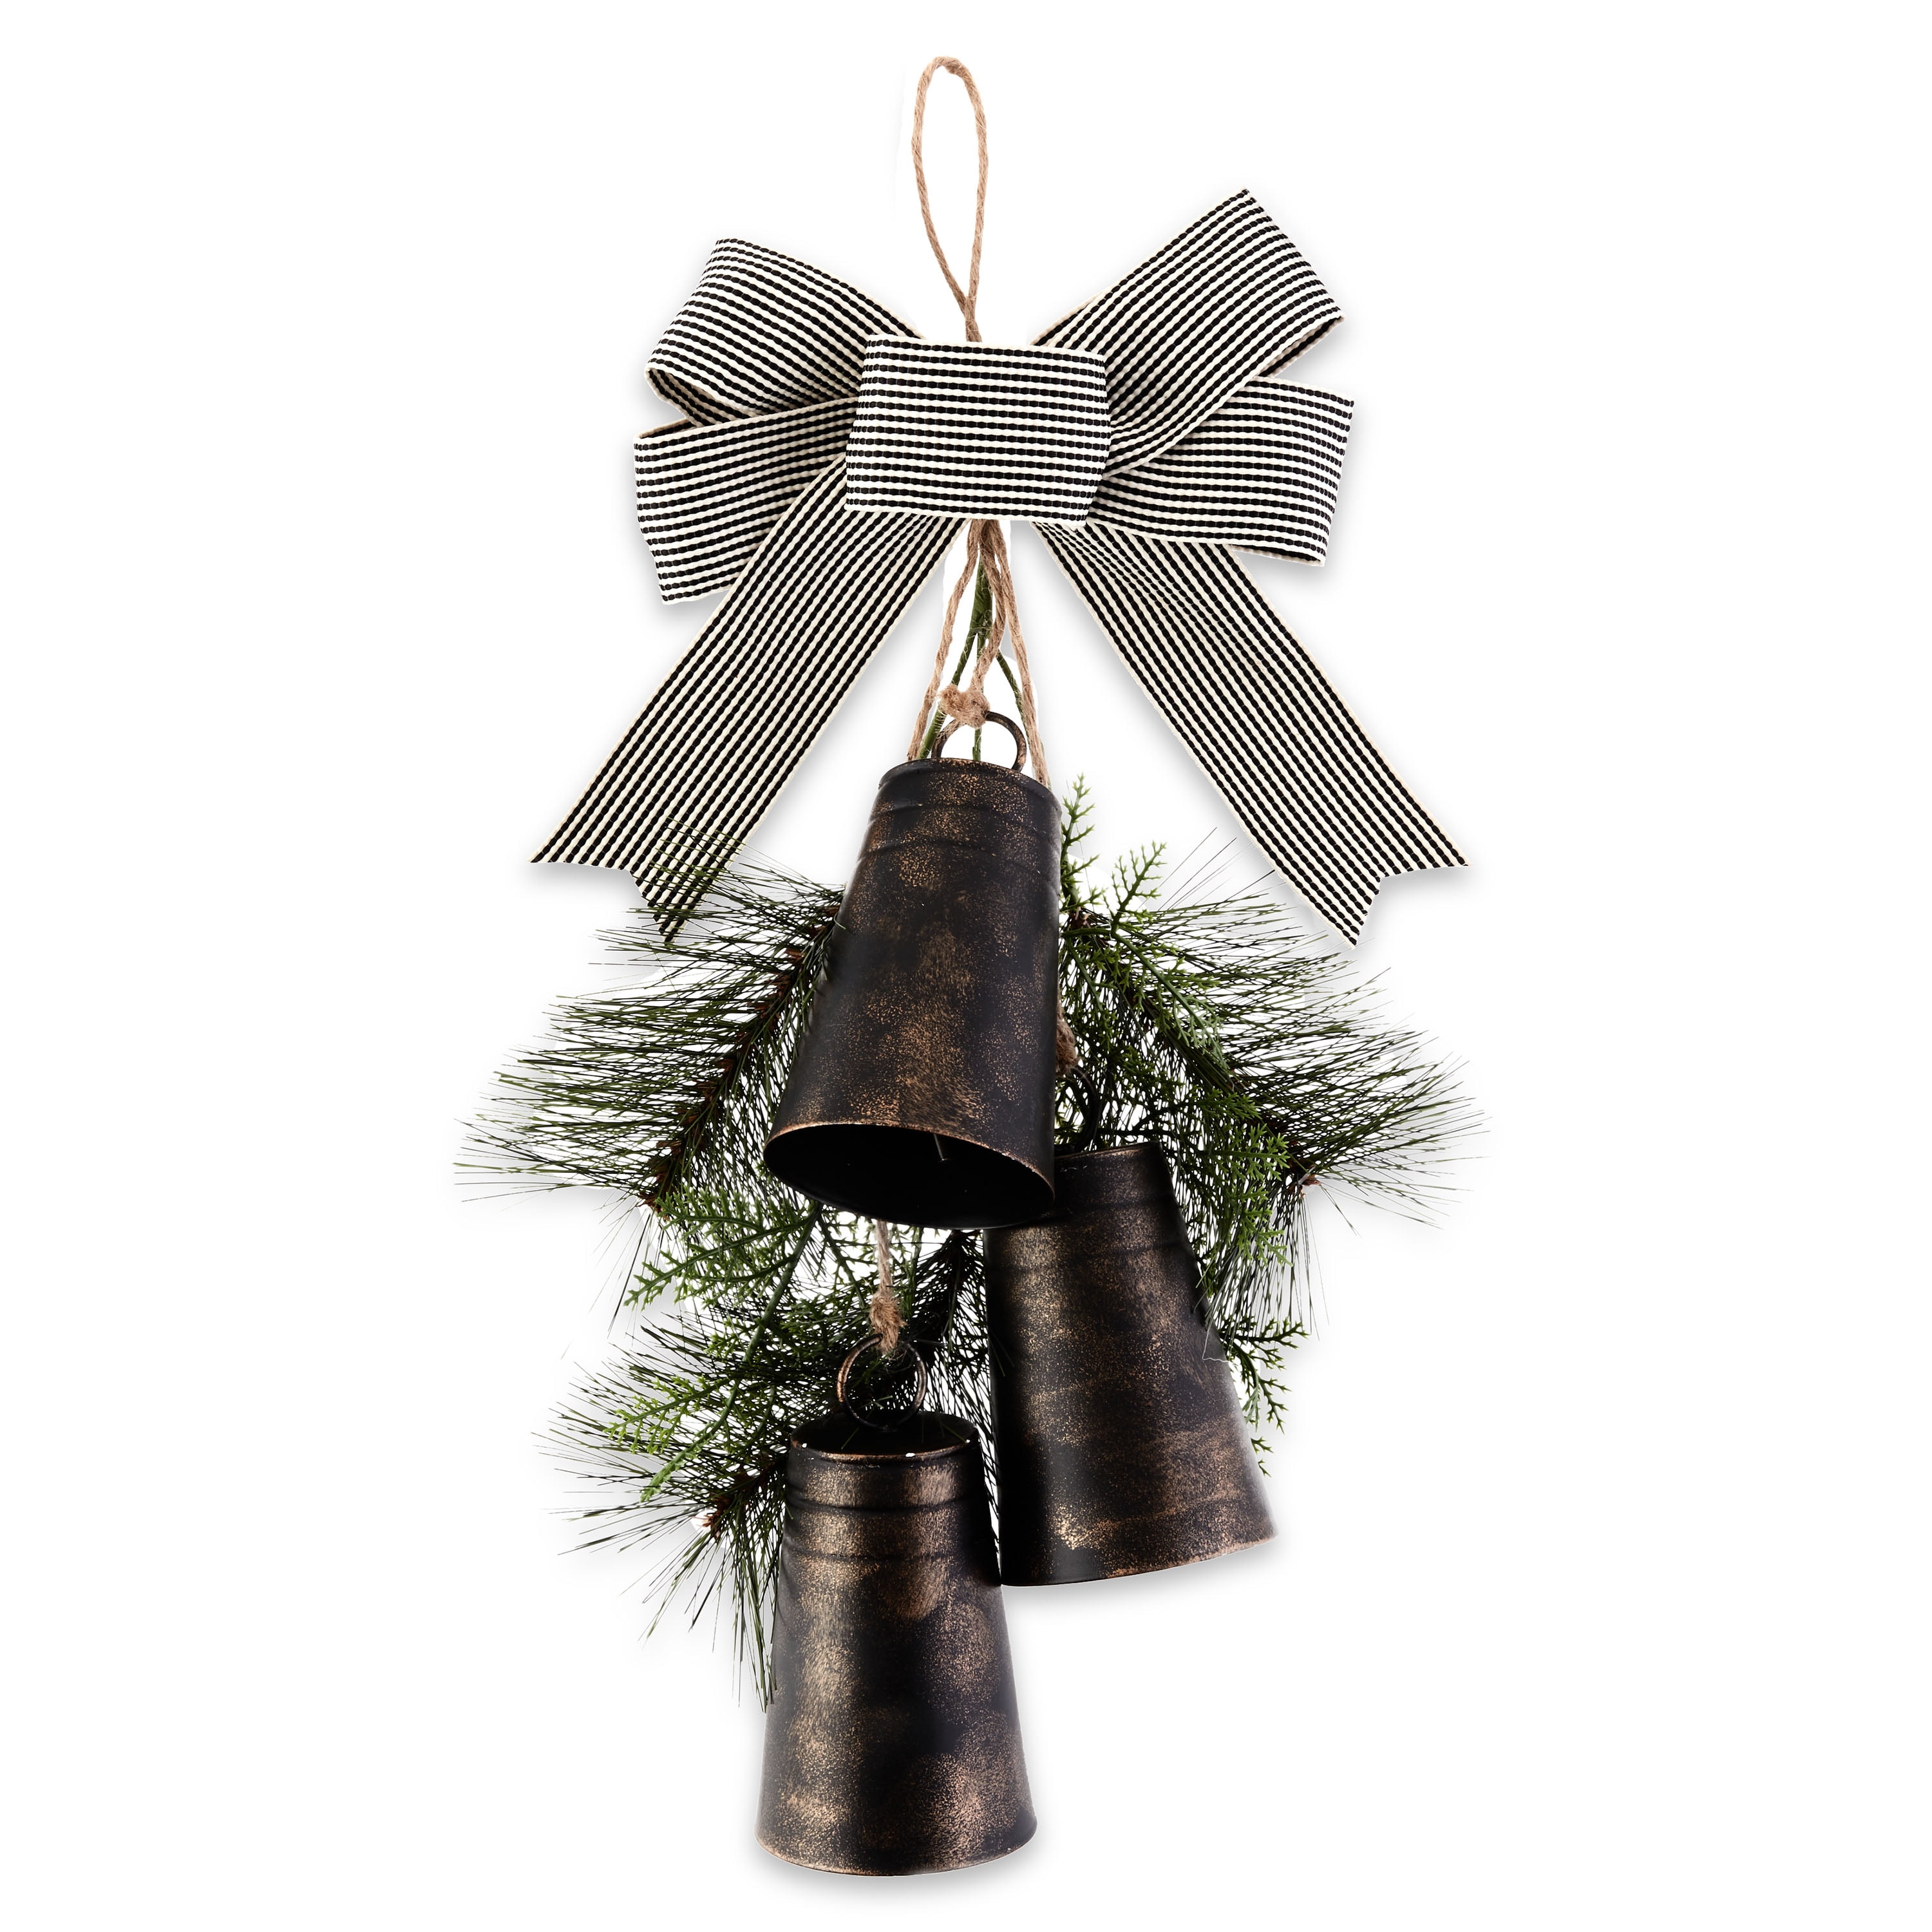 4-Count Metal Hanging Bells Christmas Decoration in Black Finish, 28.75 in,  by Holiday Time